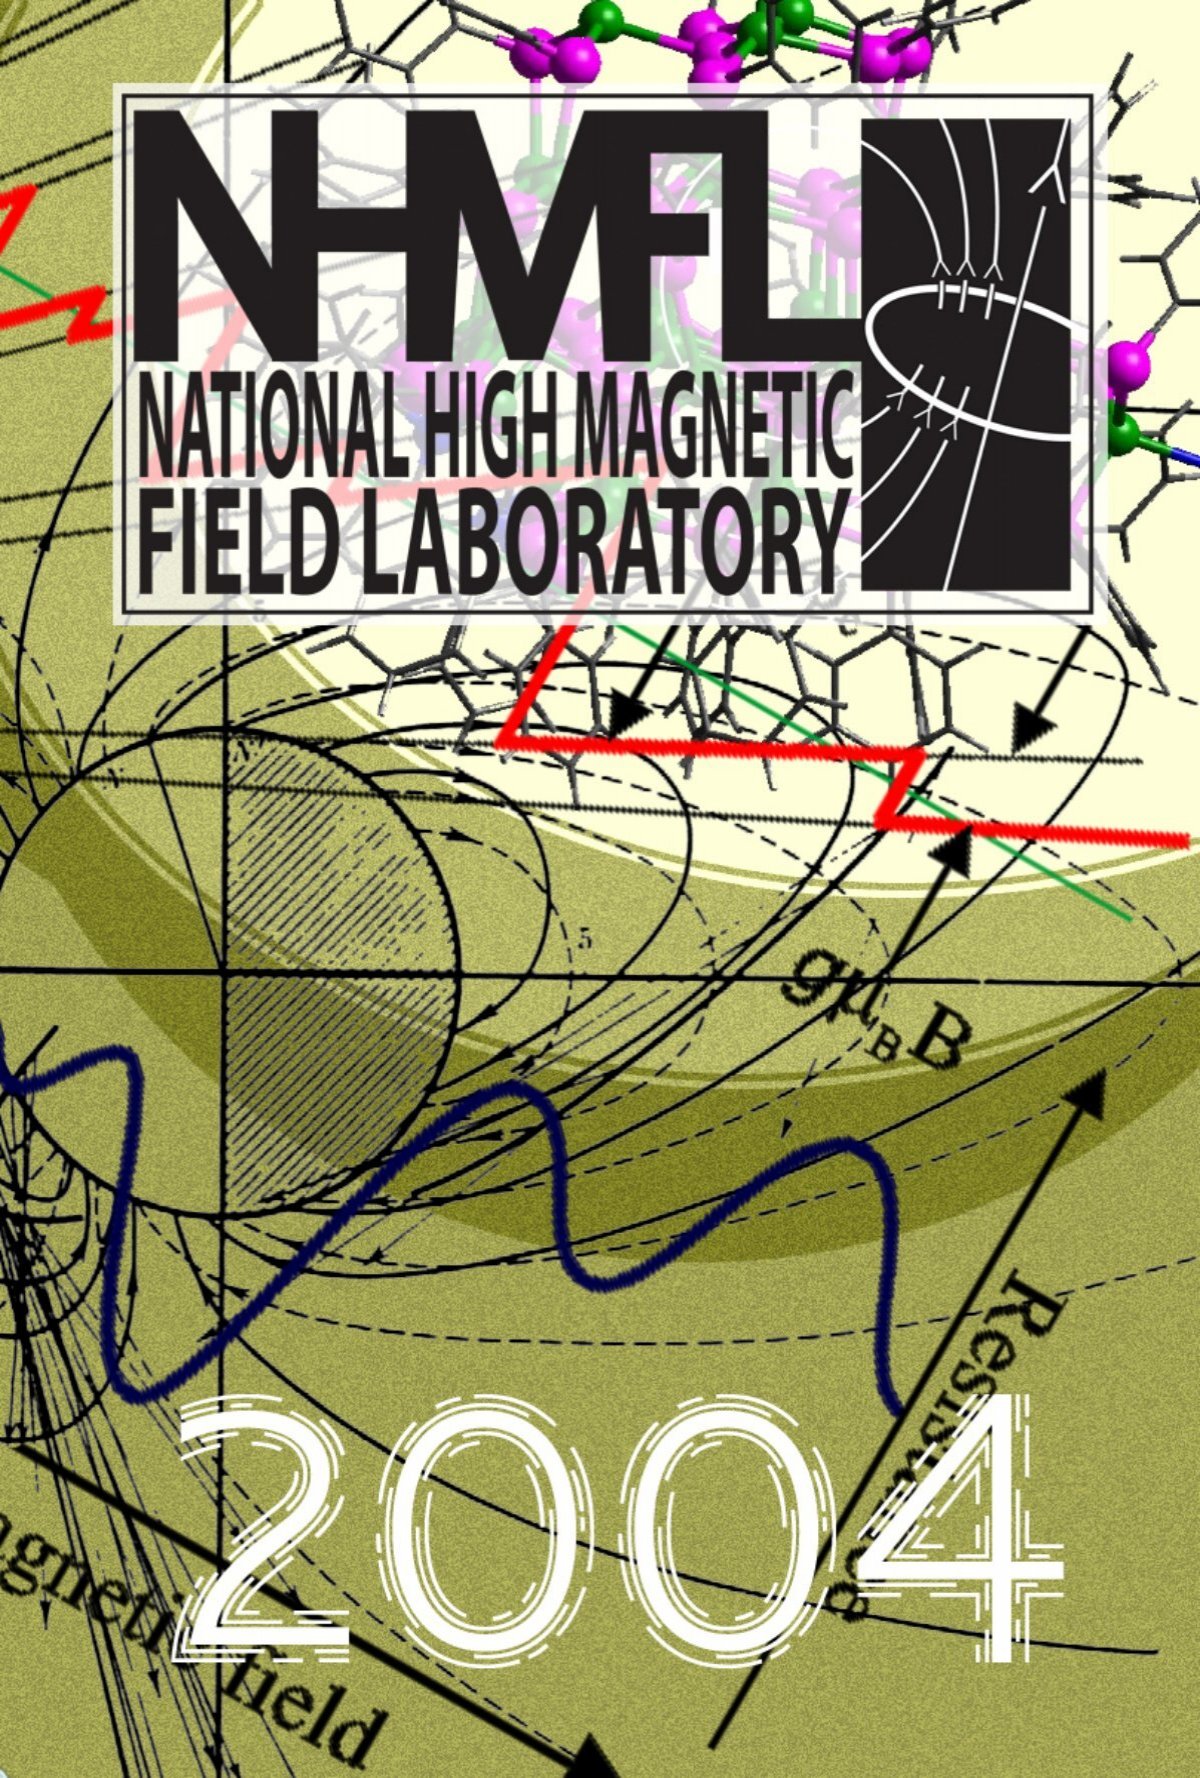 Project - National High Magnetic Field Laboratory - Florida State